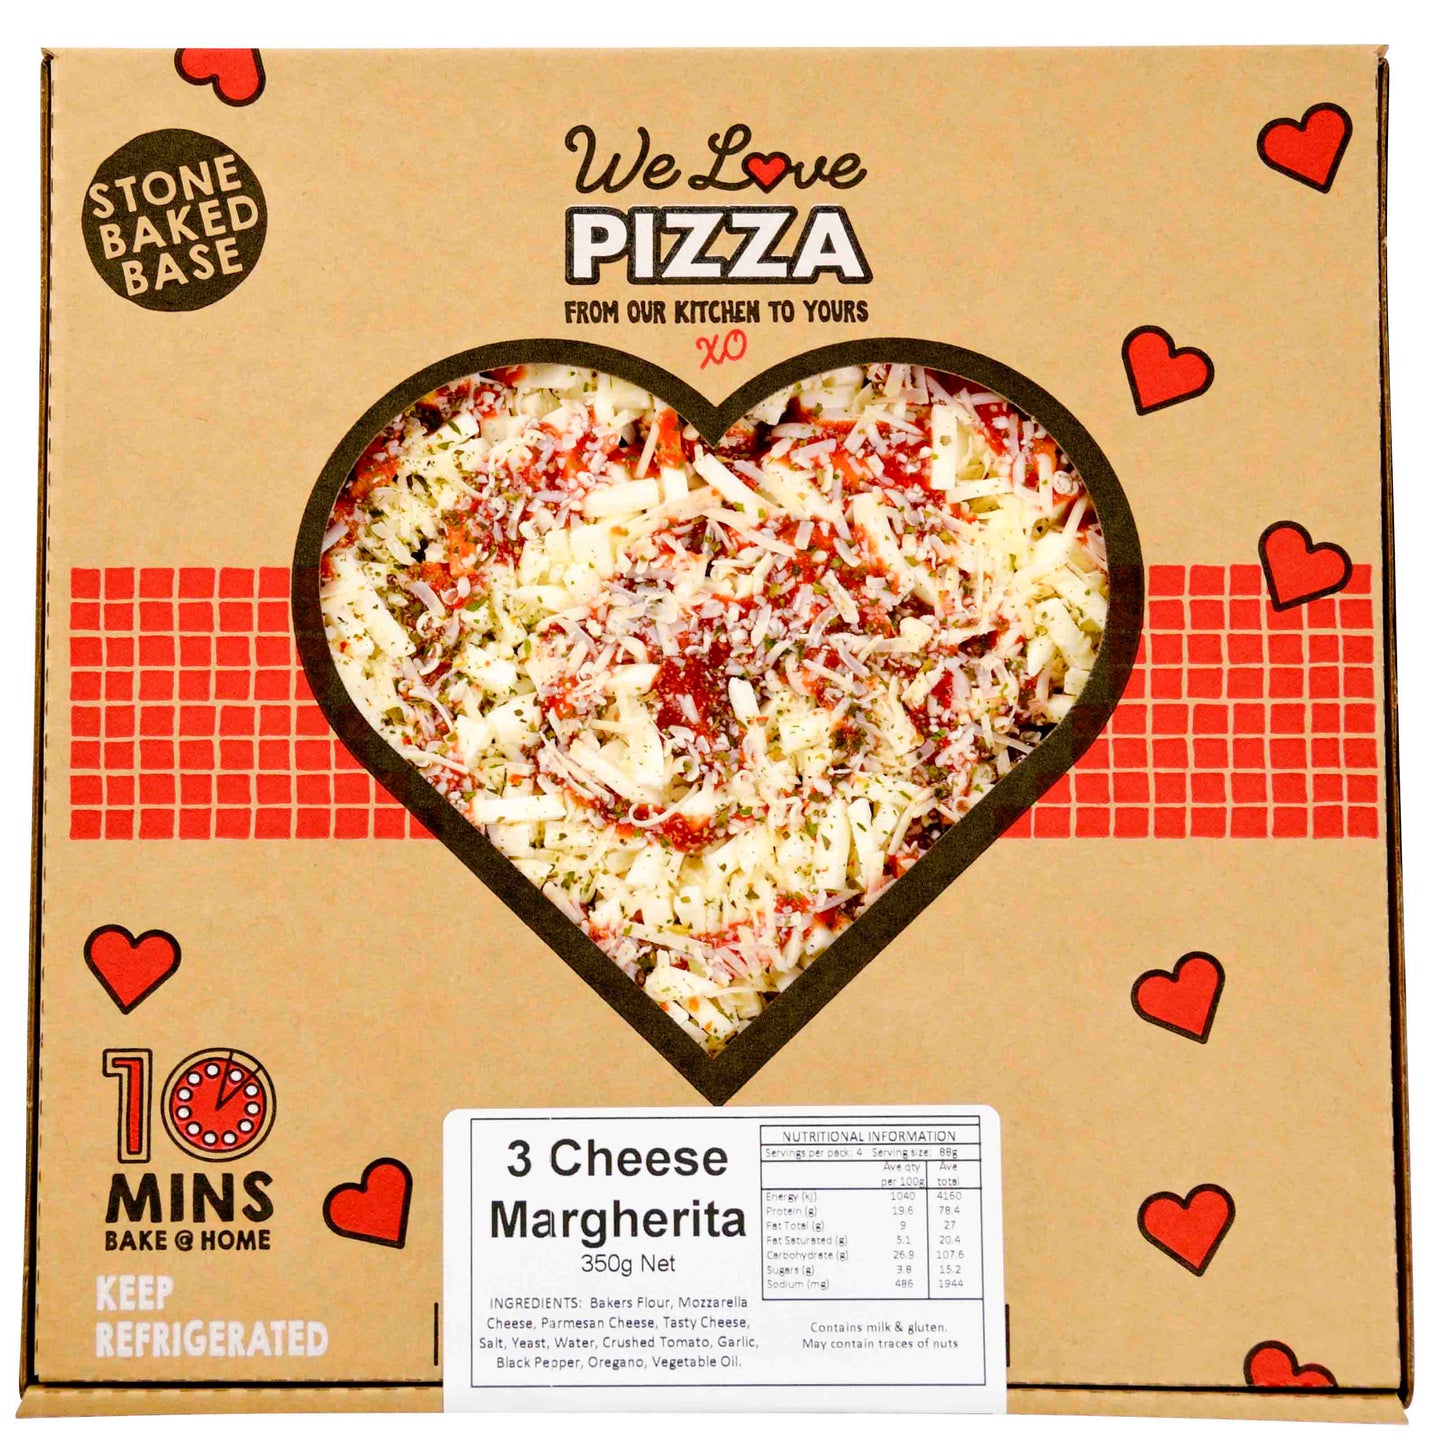 WeLove Pizza 3 CHEESE MARGHERITA 9IN